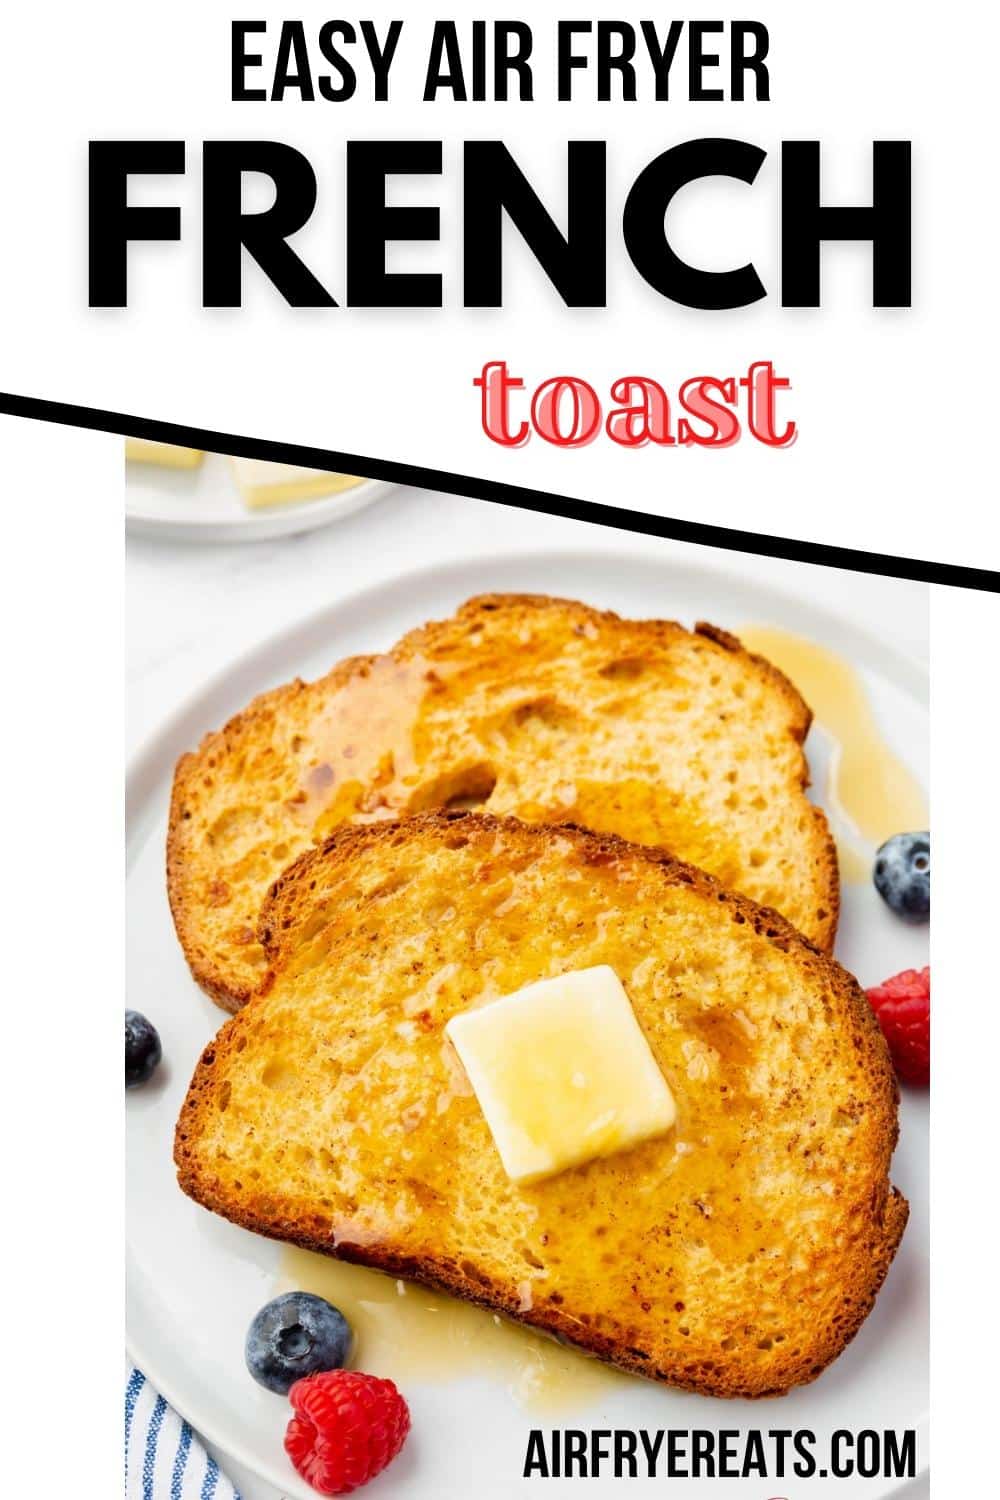 Rich, custardy, perfectly cooked French Toast is a snap to make in your air fryer! Air Fryer French Toast will be a family favorite, and it's easy enough to make on even the busiest mornings. via @vegetarianmamma